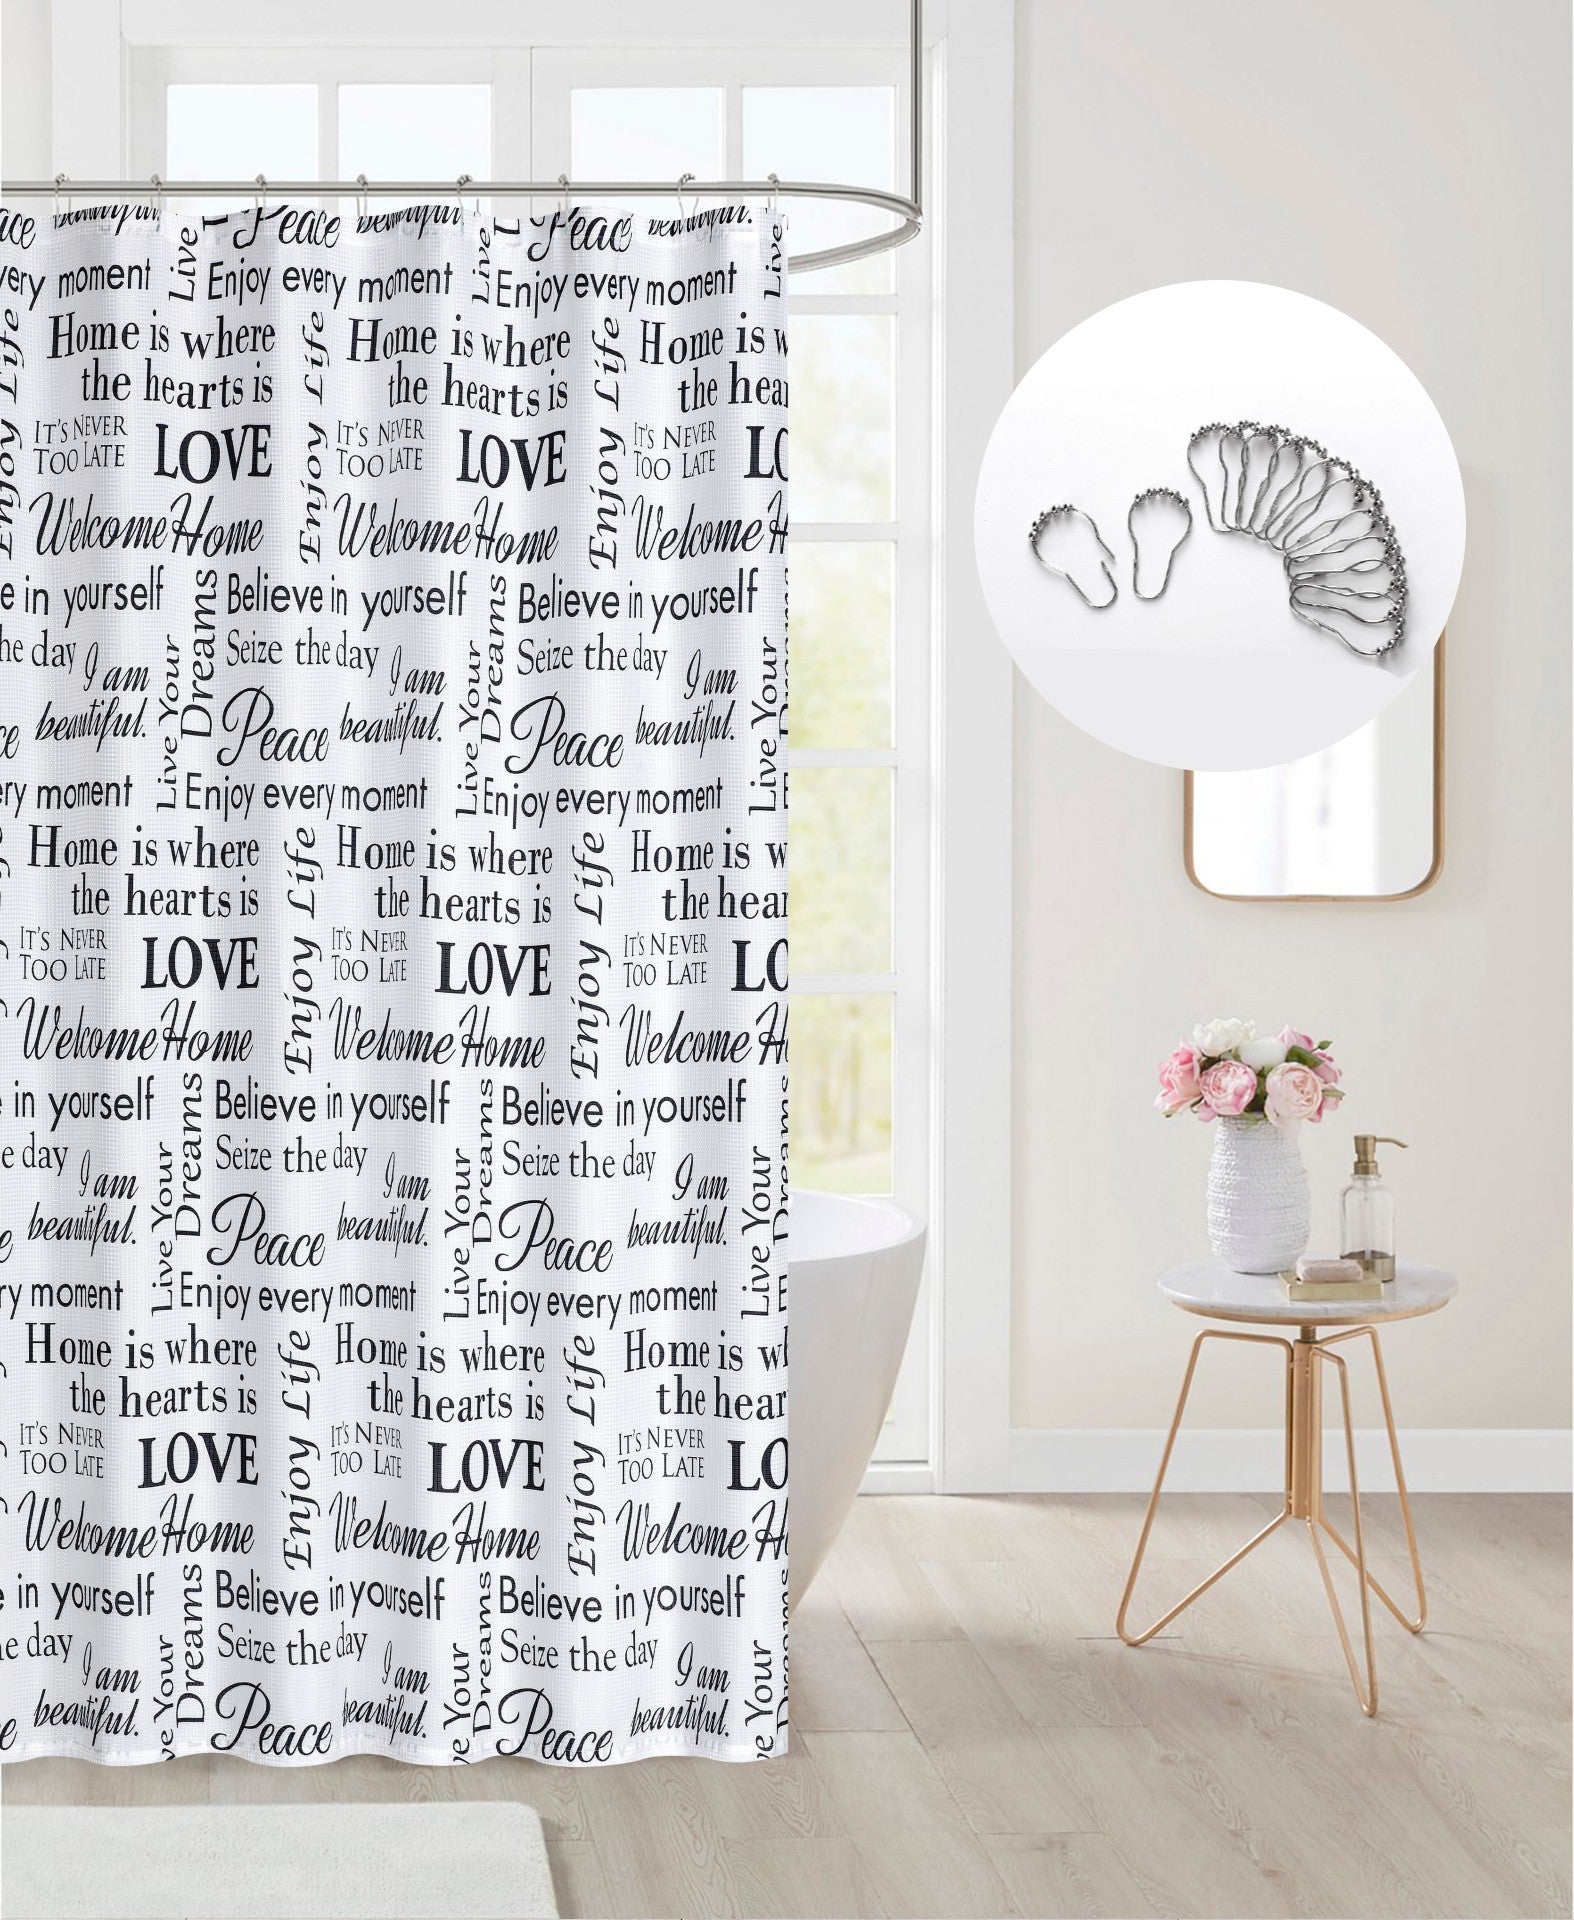 Dainty Home Printed 3D Textured Waffle Weave Textured Love Phrases Designed Fabric Shower Curtain with 12 Roller Ball Hooks Included 70" x 72"